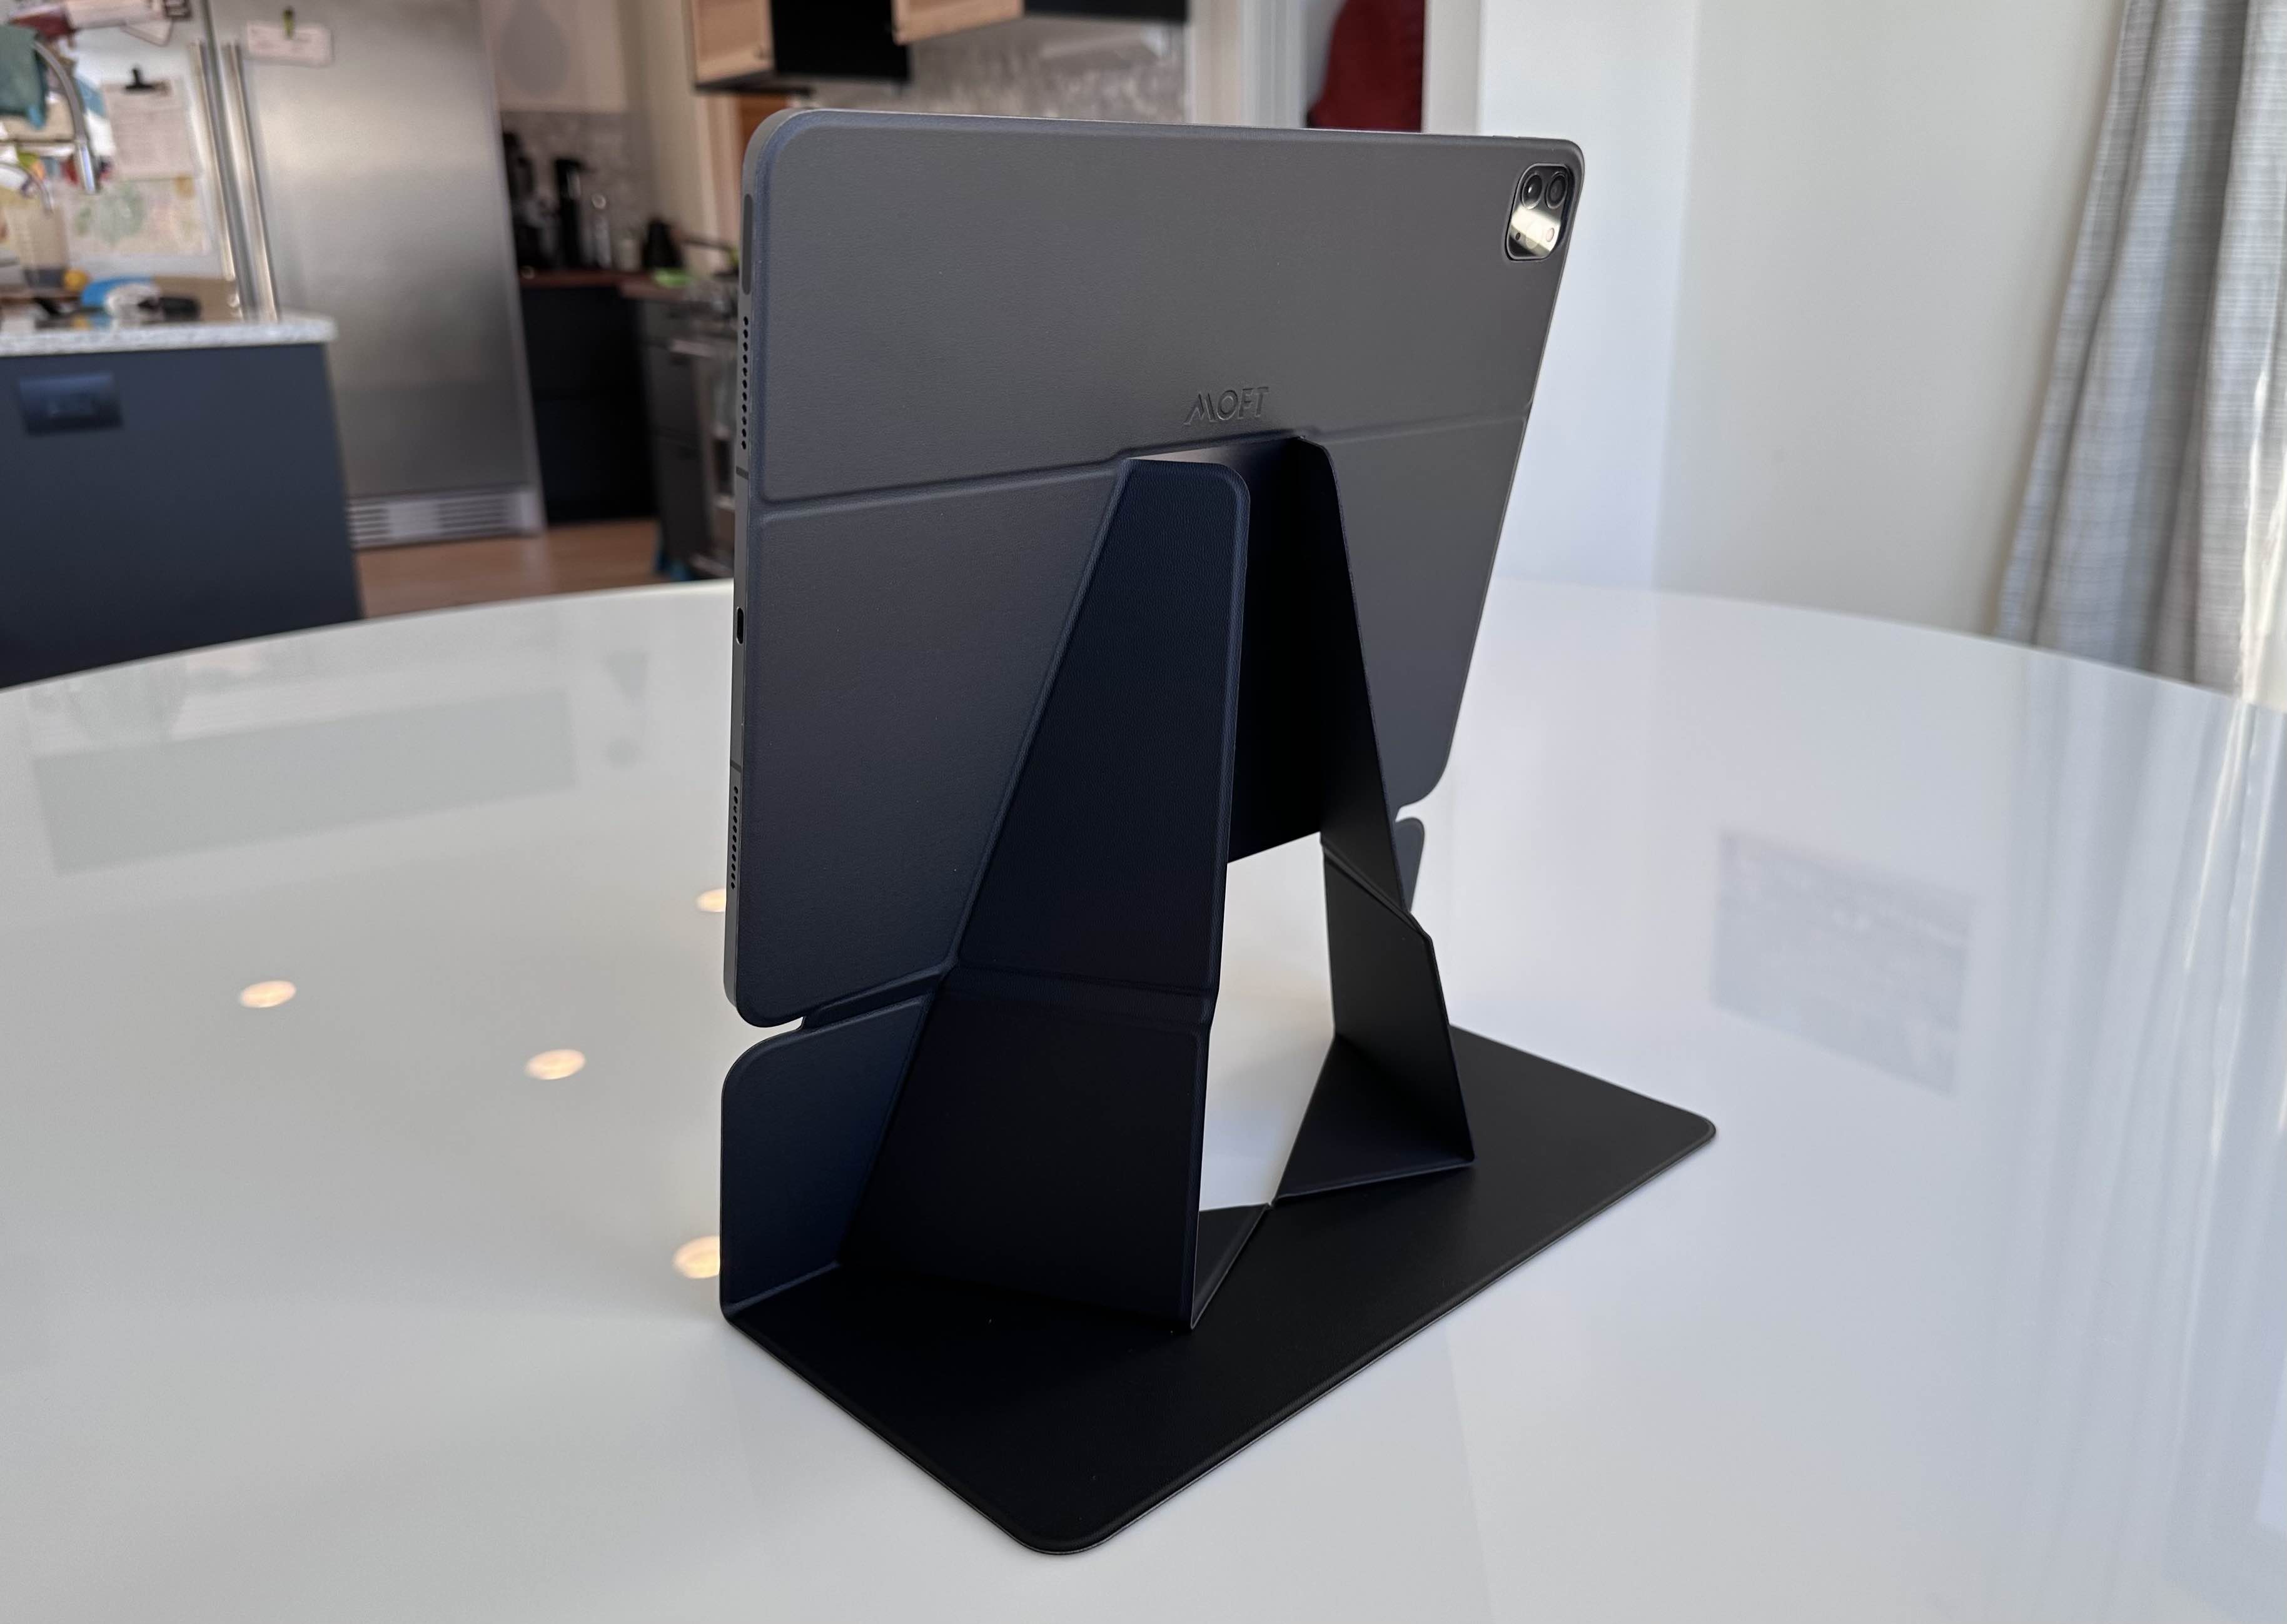 Moft reviews the Float Folio High Stand for iPad